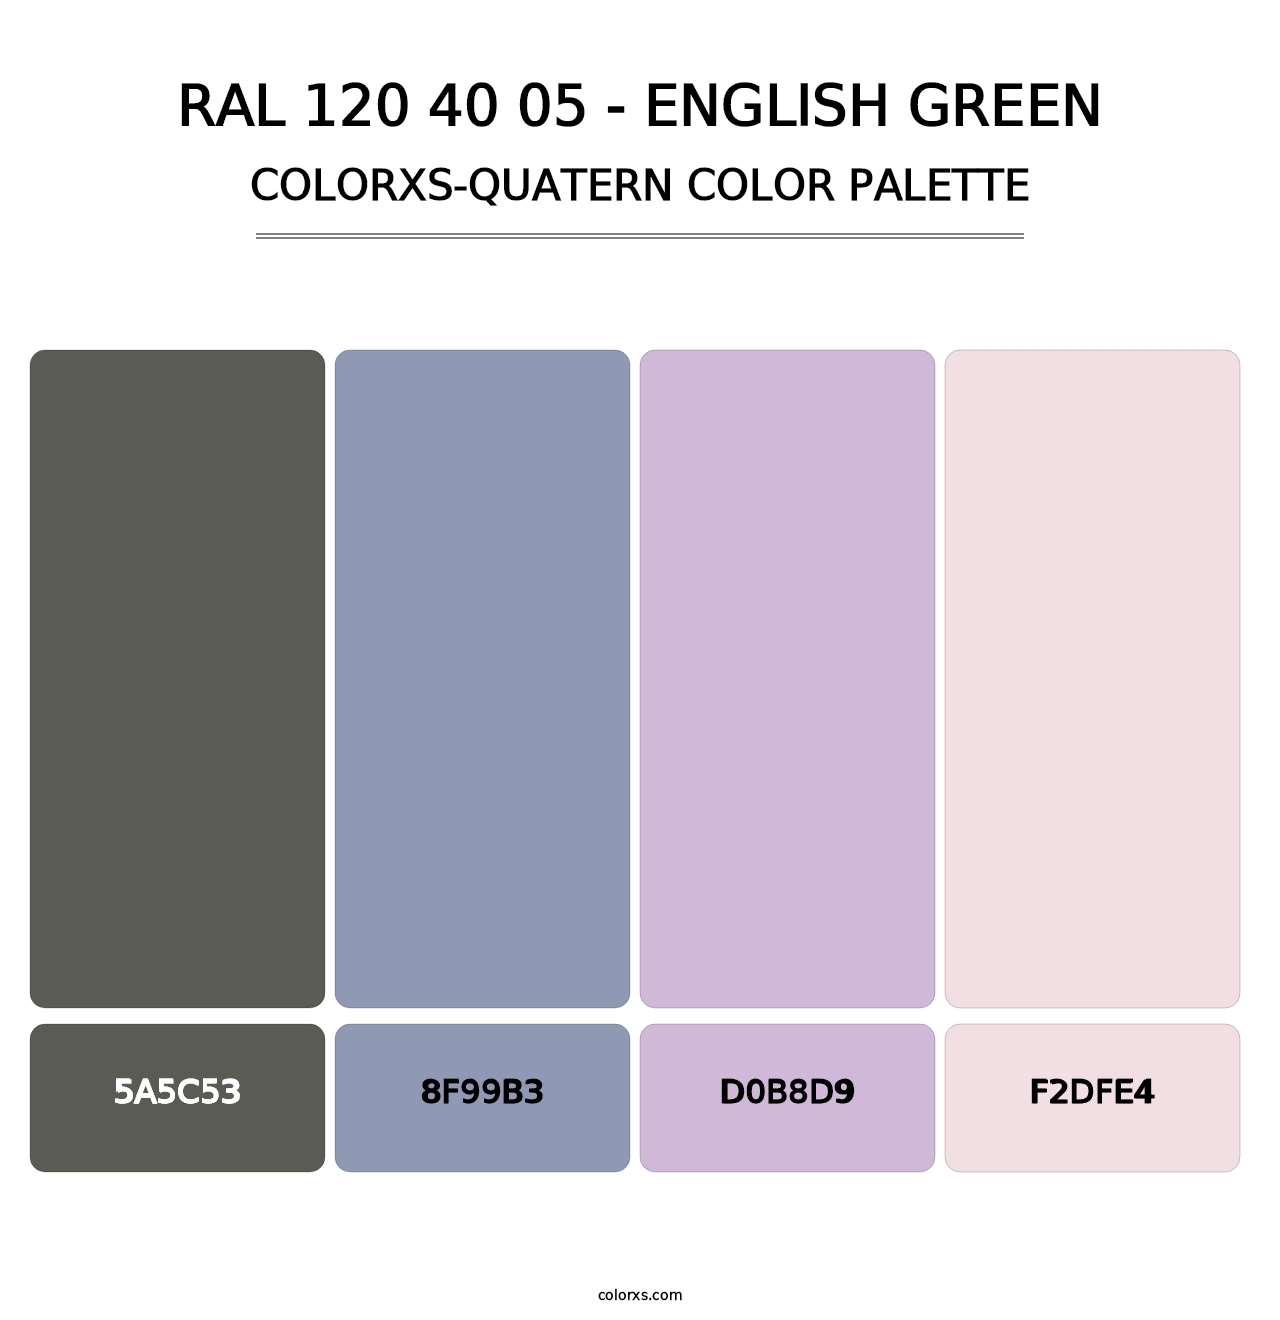 RAL 120 40 05 - English Green - Colorxs Quatern Palette